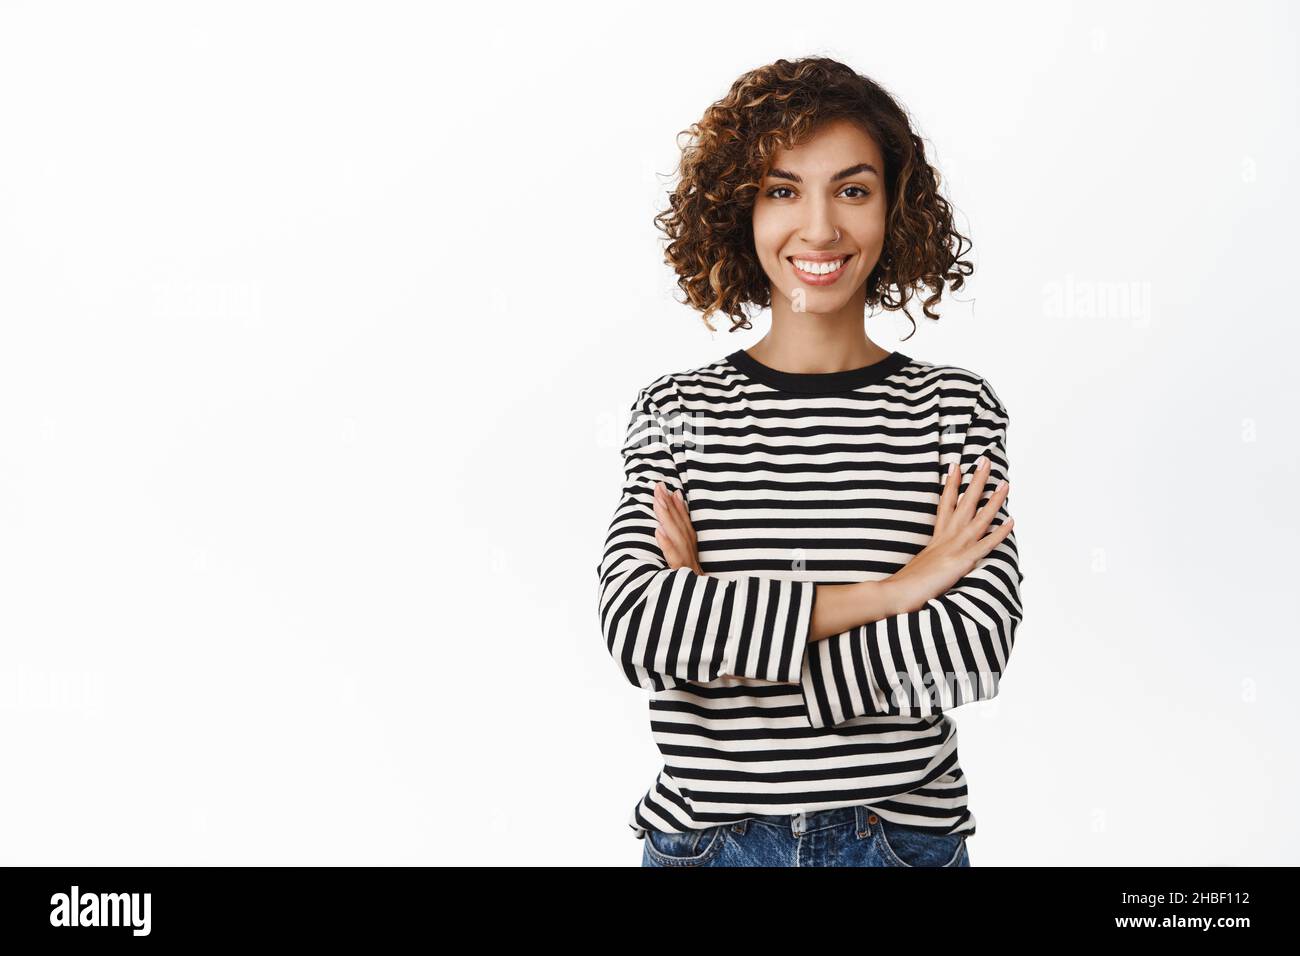 Stylish modern middle eastern girl with curly short hair, posing in casual clothes against white backgrund, smiling and looking confident Stock Photo